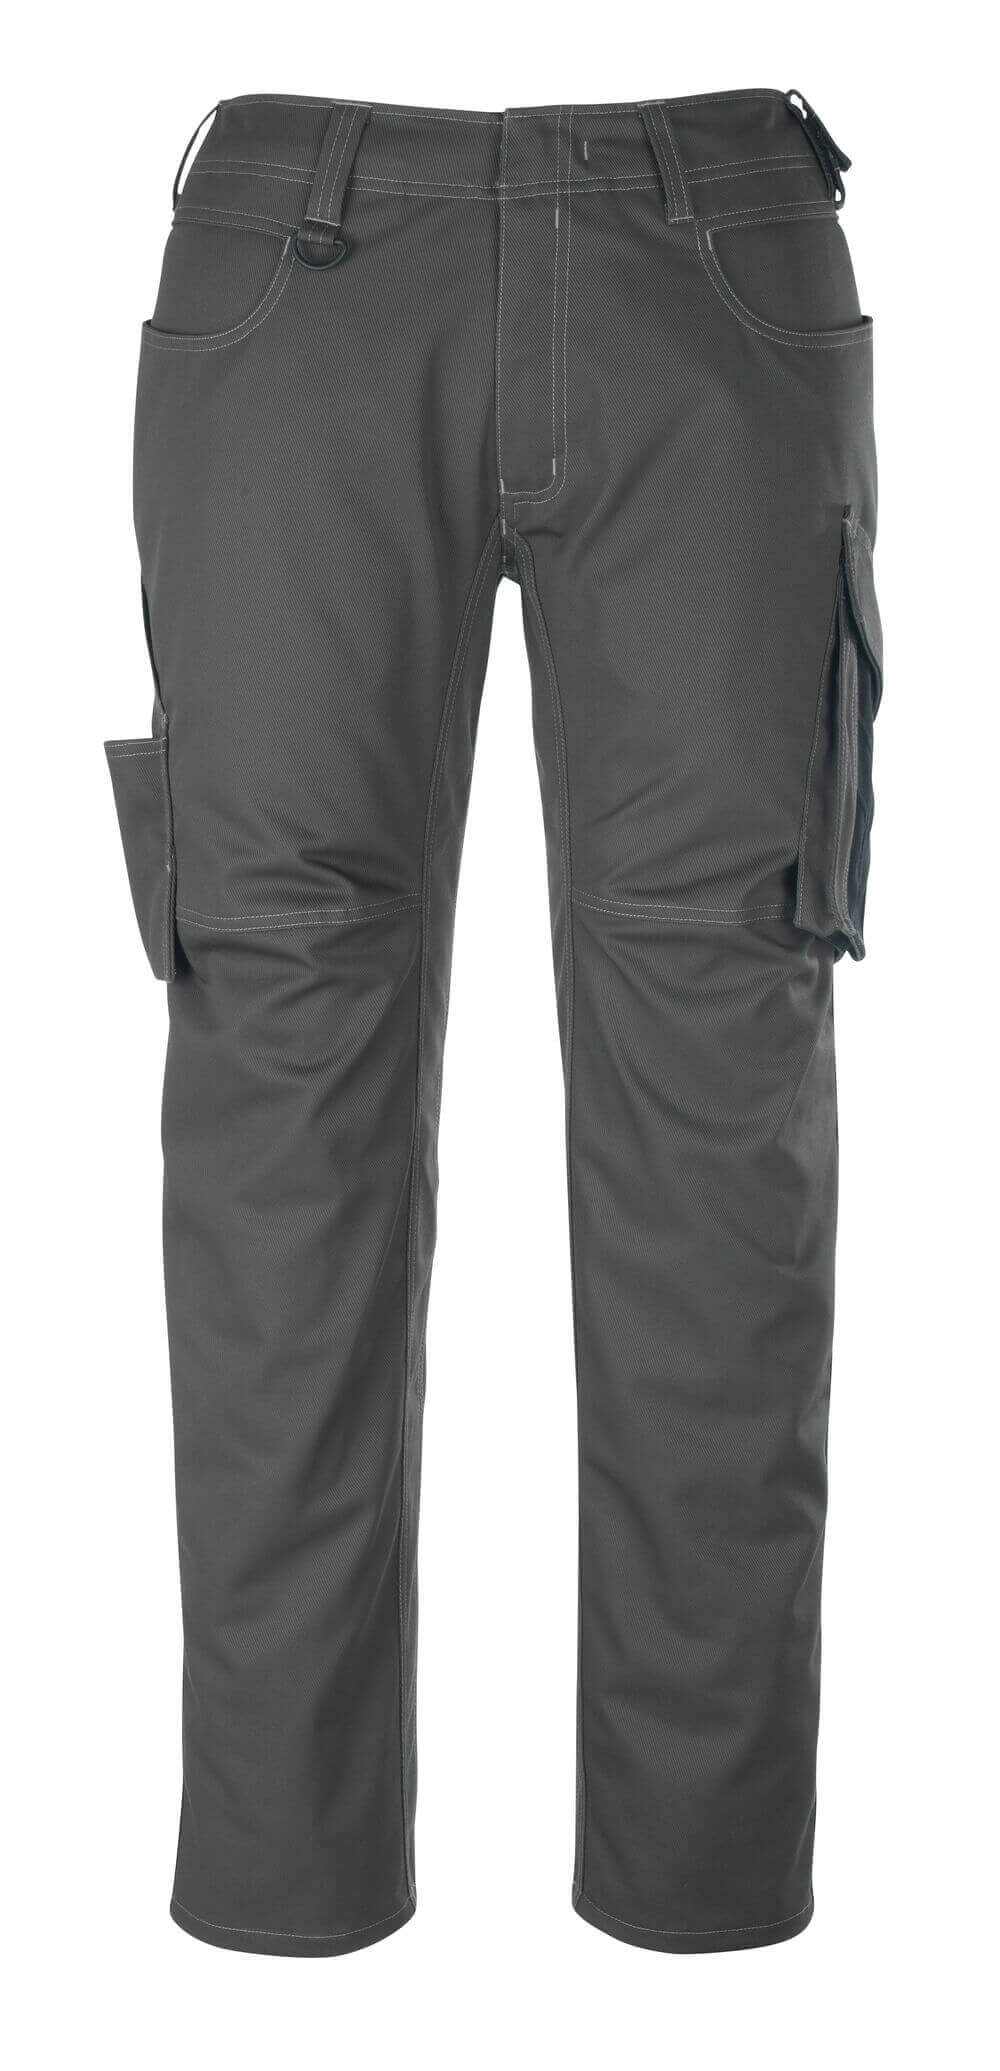 12079-203-1809 Trousers with thigh pockets - dark anthracite/black